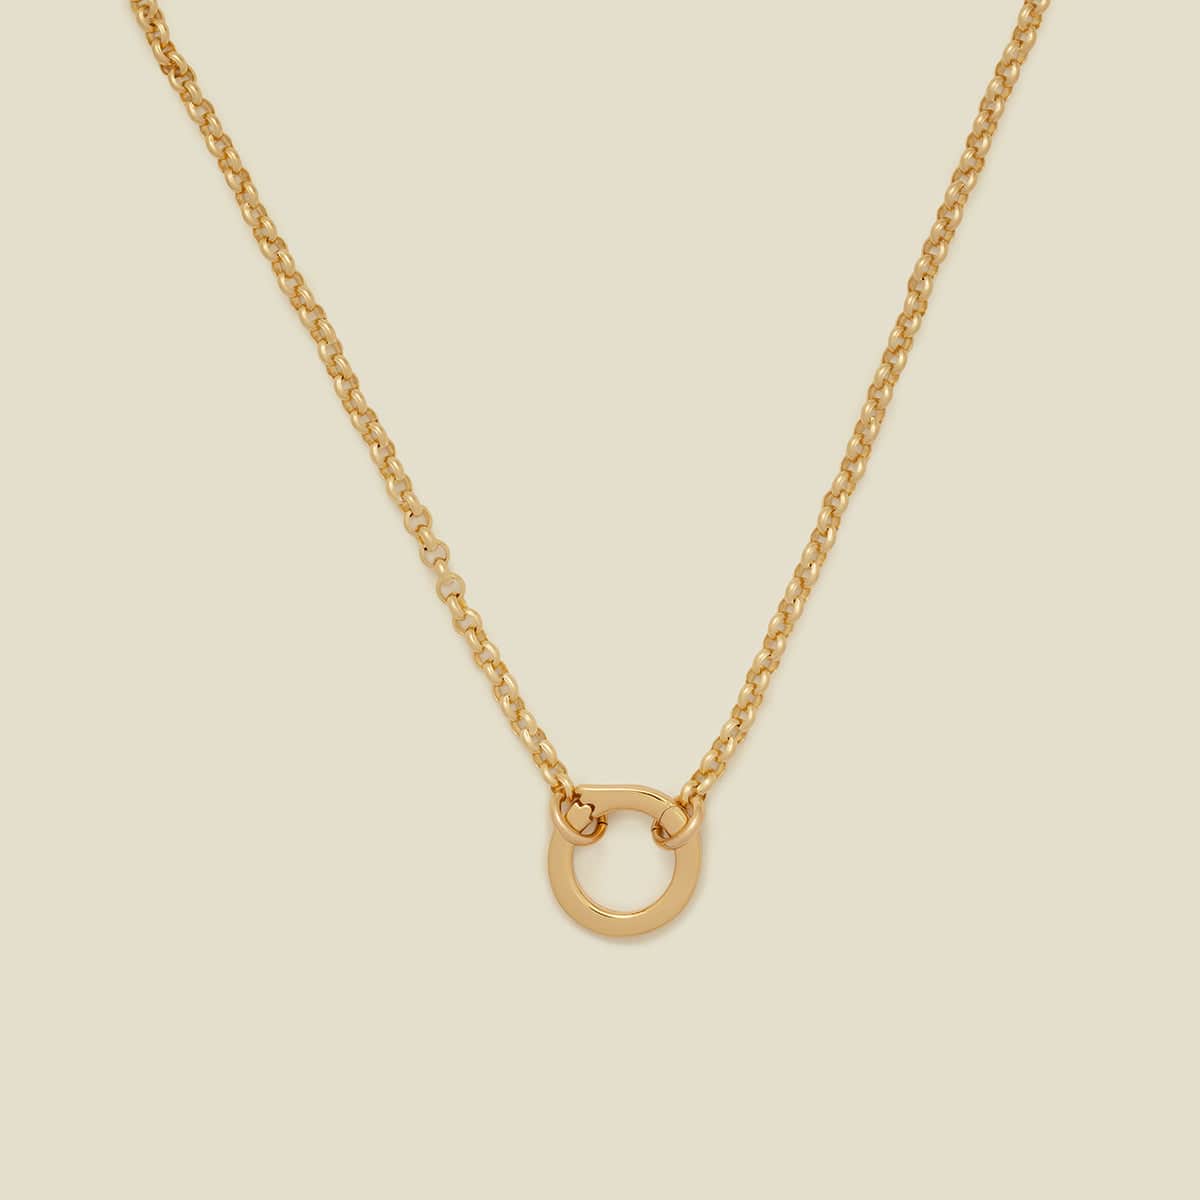 Rolo Charm Necklace Gold Filled / With Link Lock Necklace